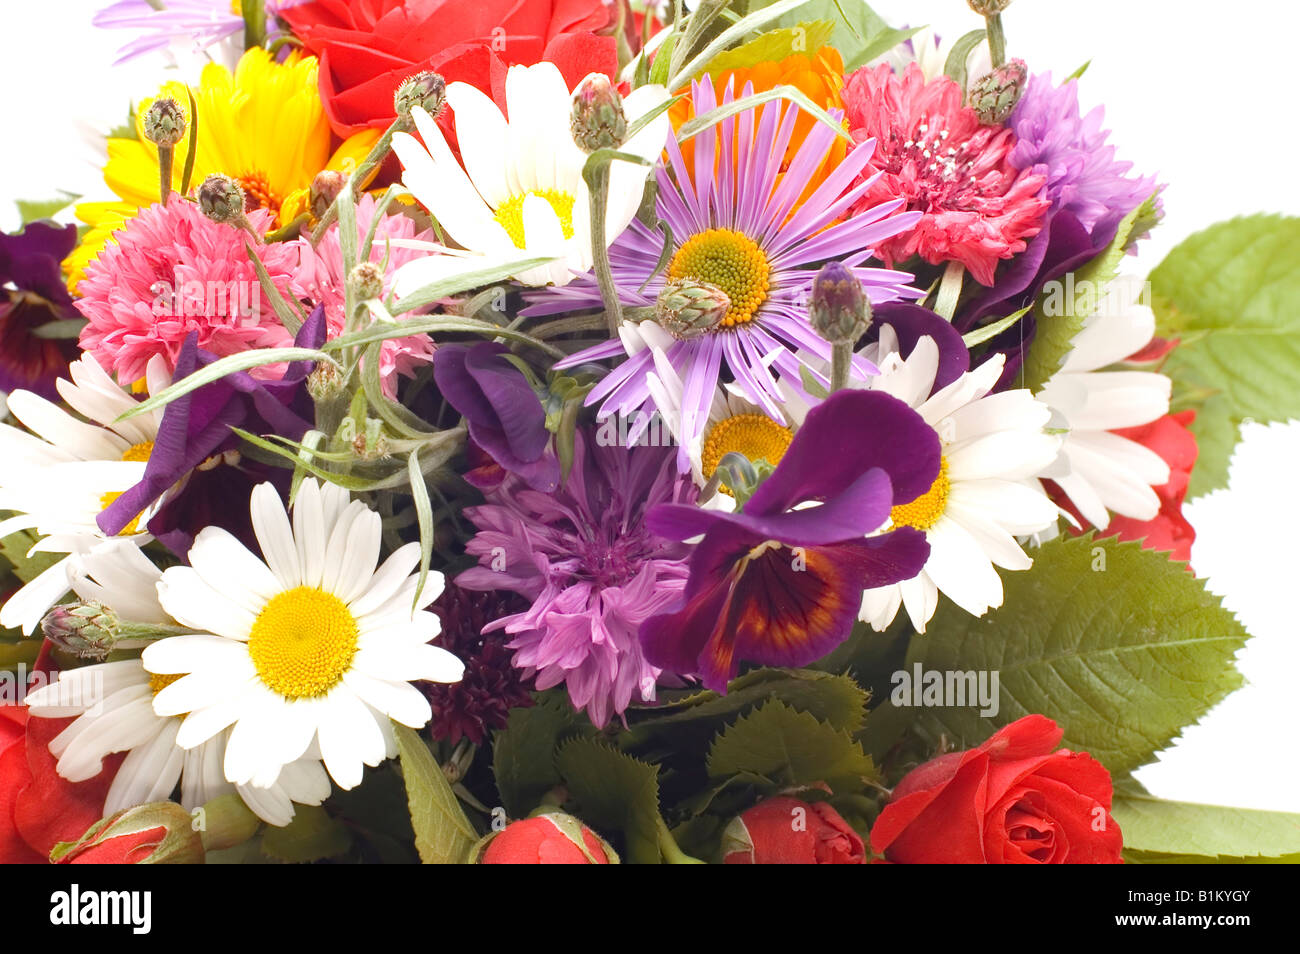 object on white bunch of flowers Stock Photo